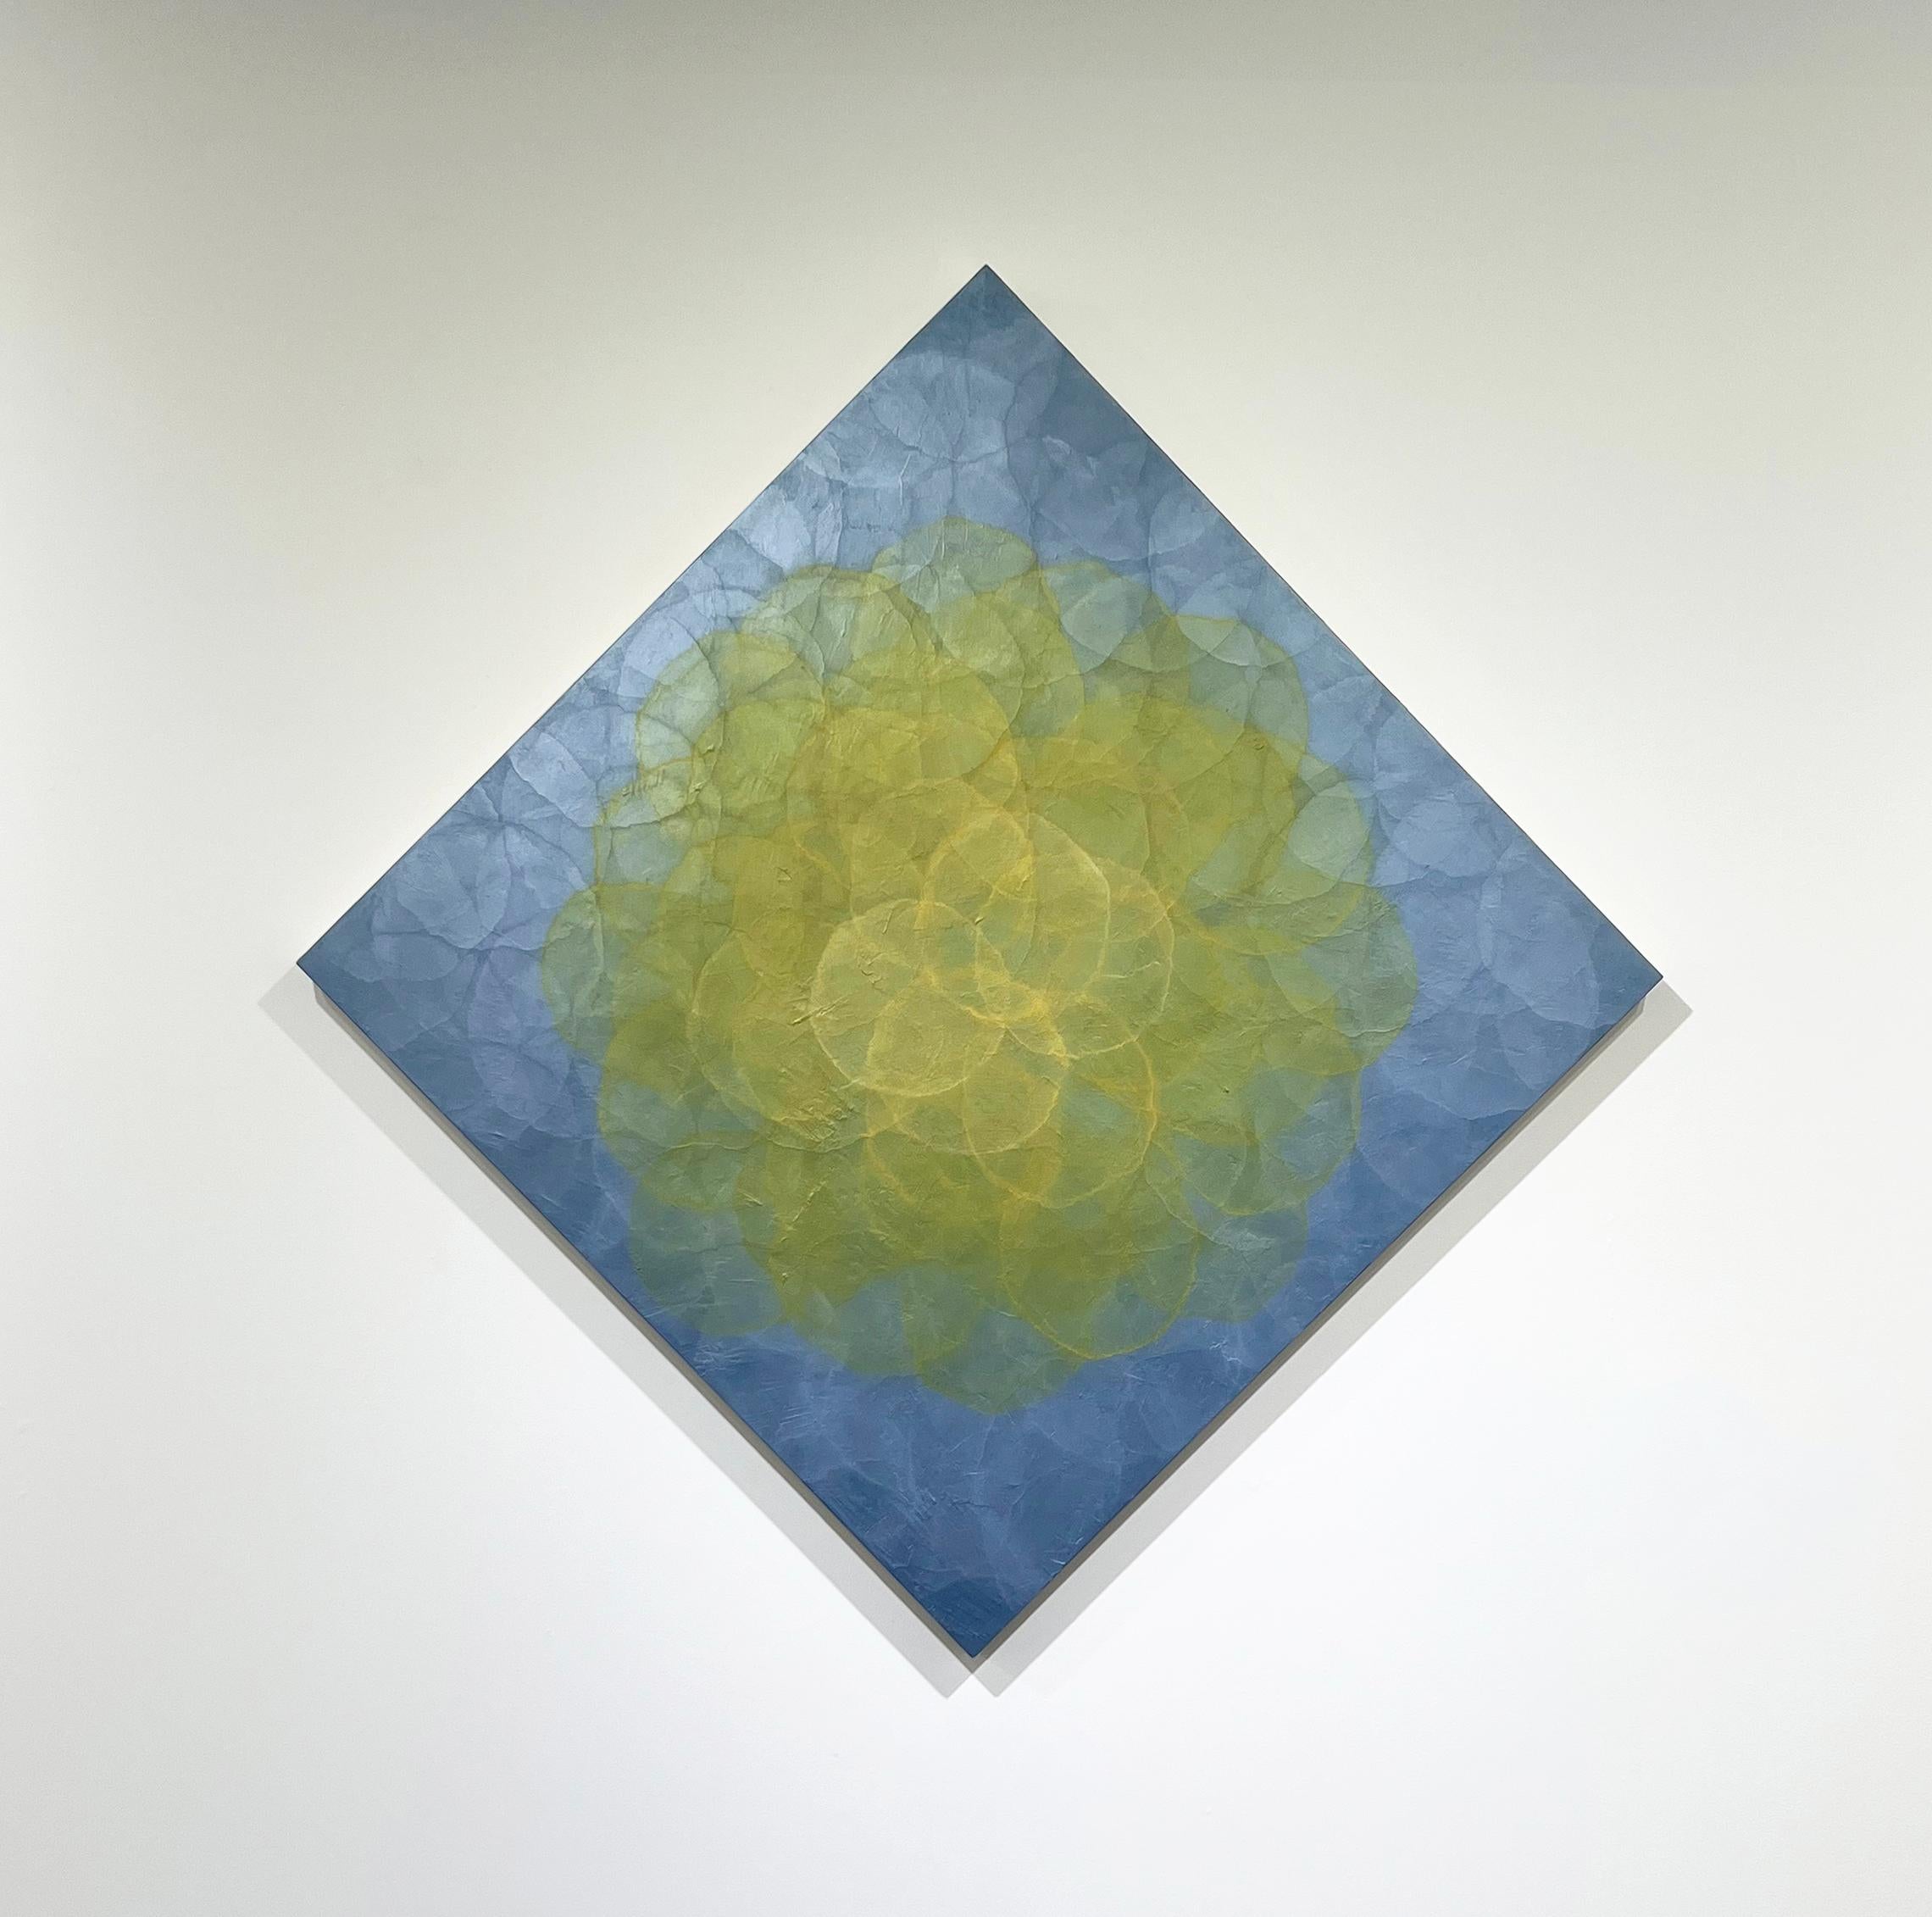 This abstract painting by Roger Mudre is made with acrylic paint over marble dust and mica powder on cradled birch panel. It features a vibrant palette with small concentric circles composing a larger yellow circle at the center of the composition,